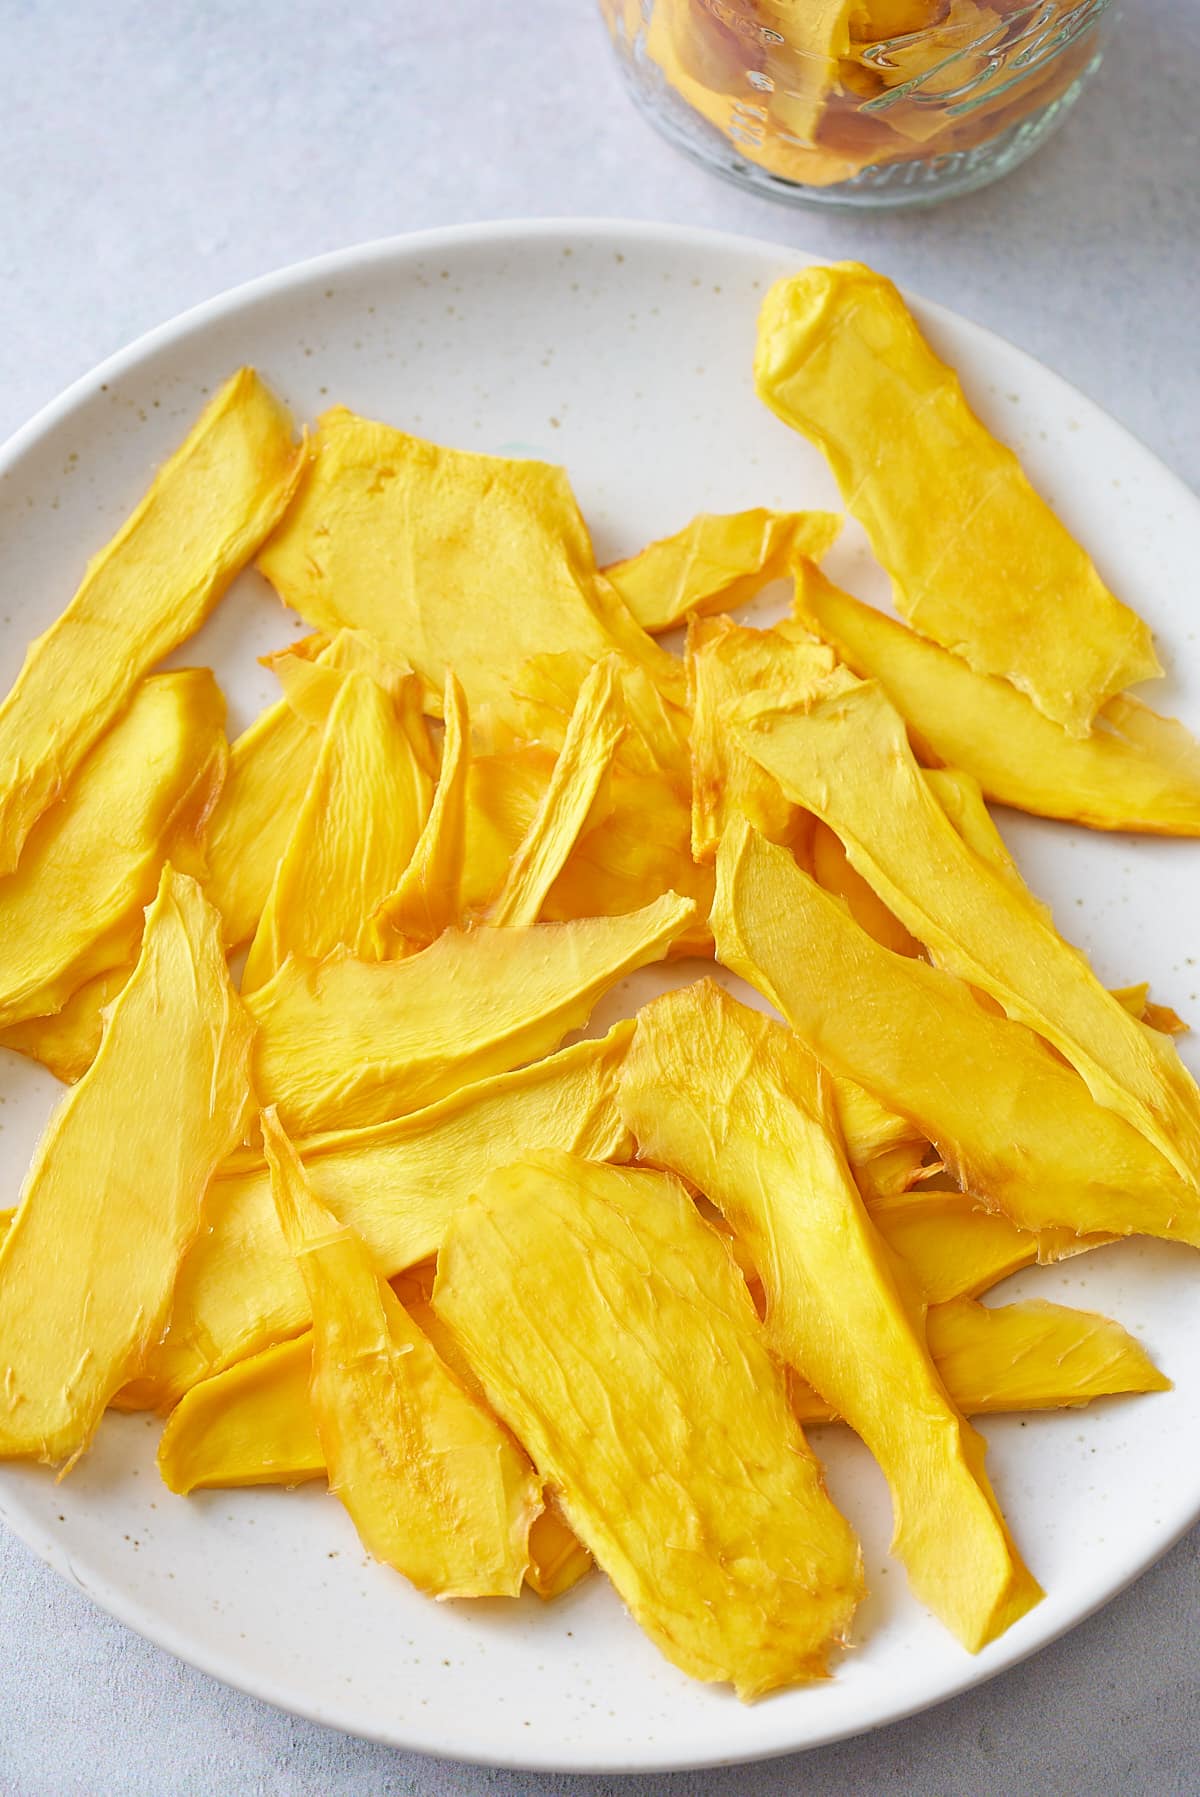 dehydrated mango slices on a white plate